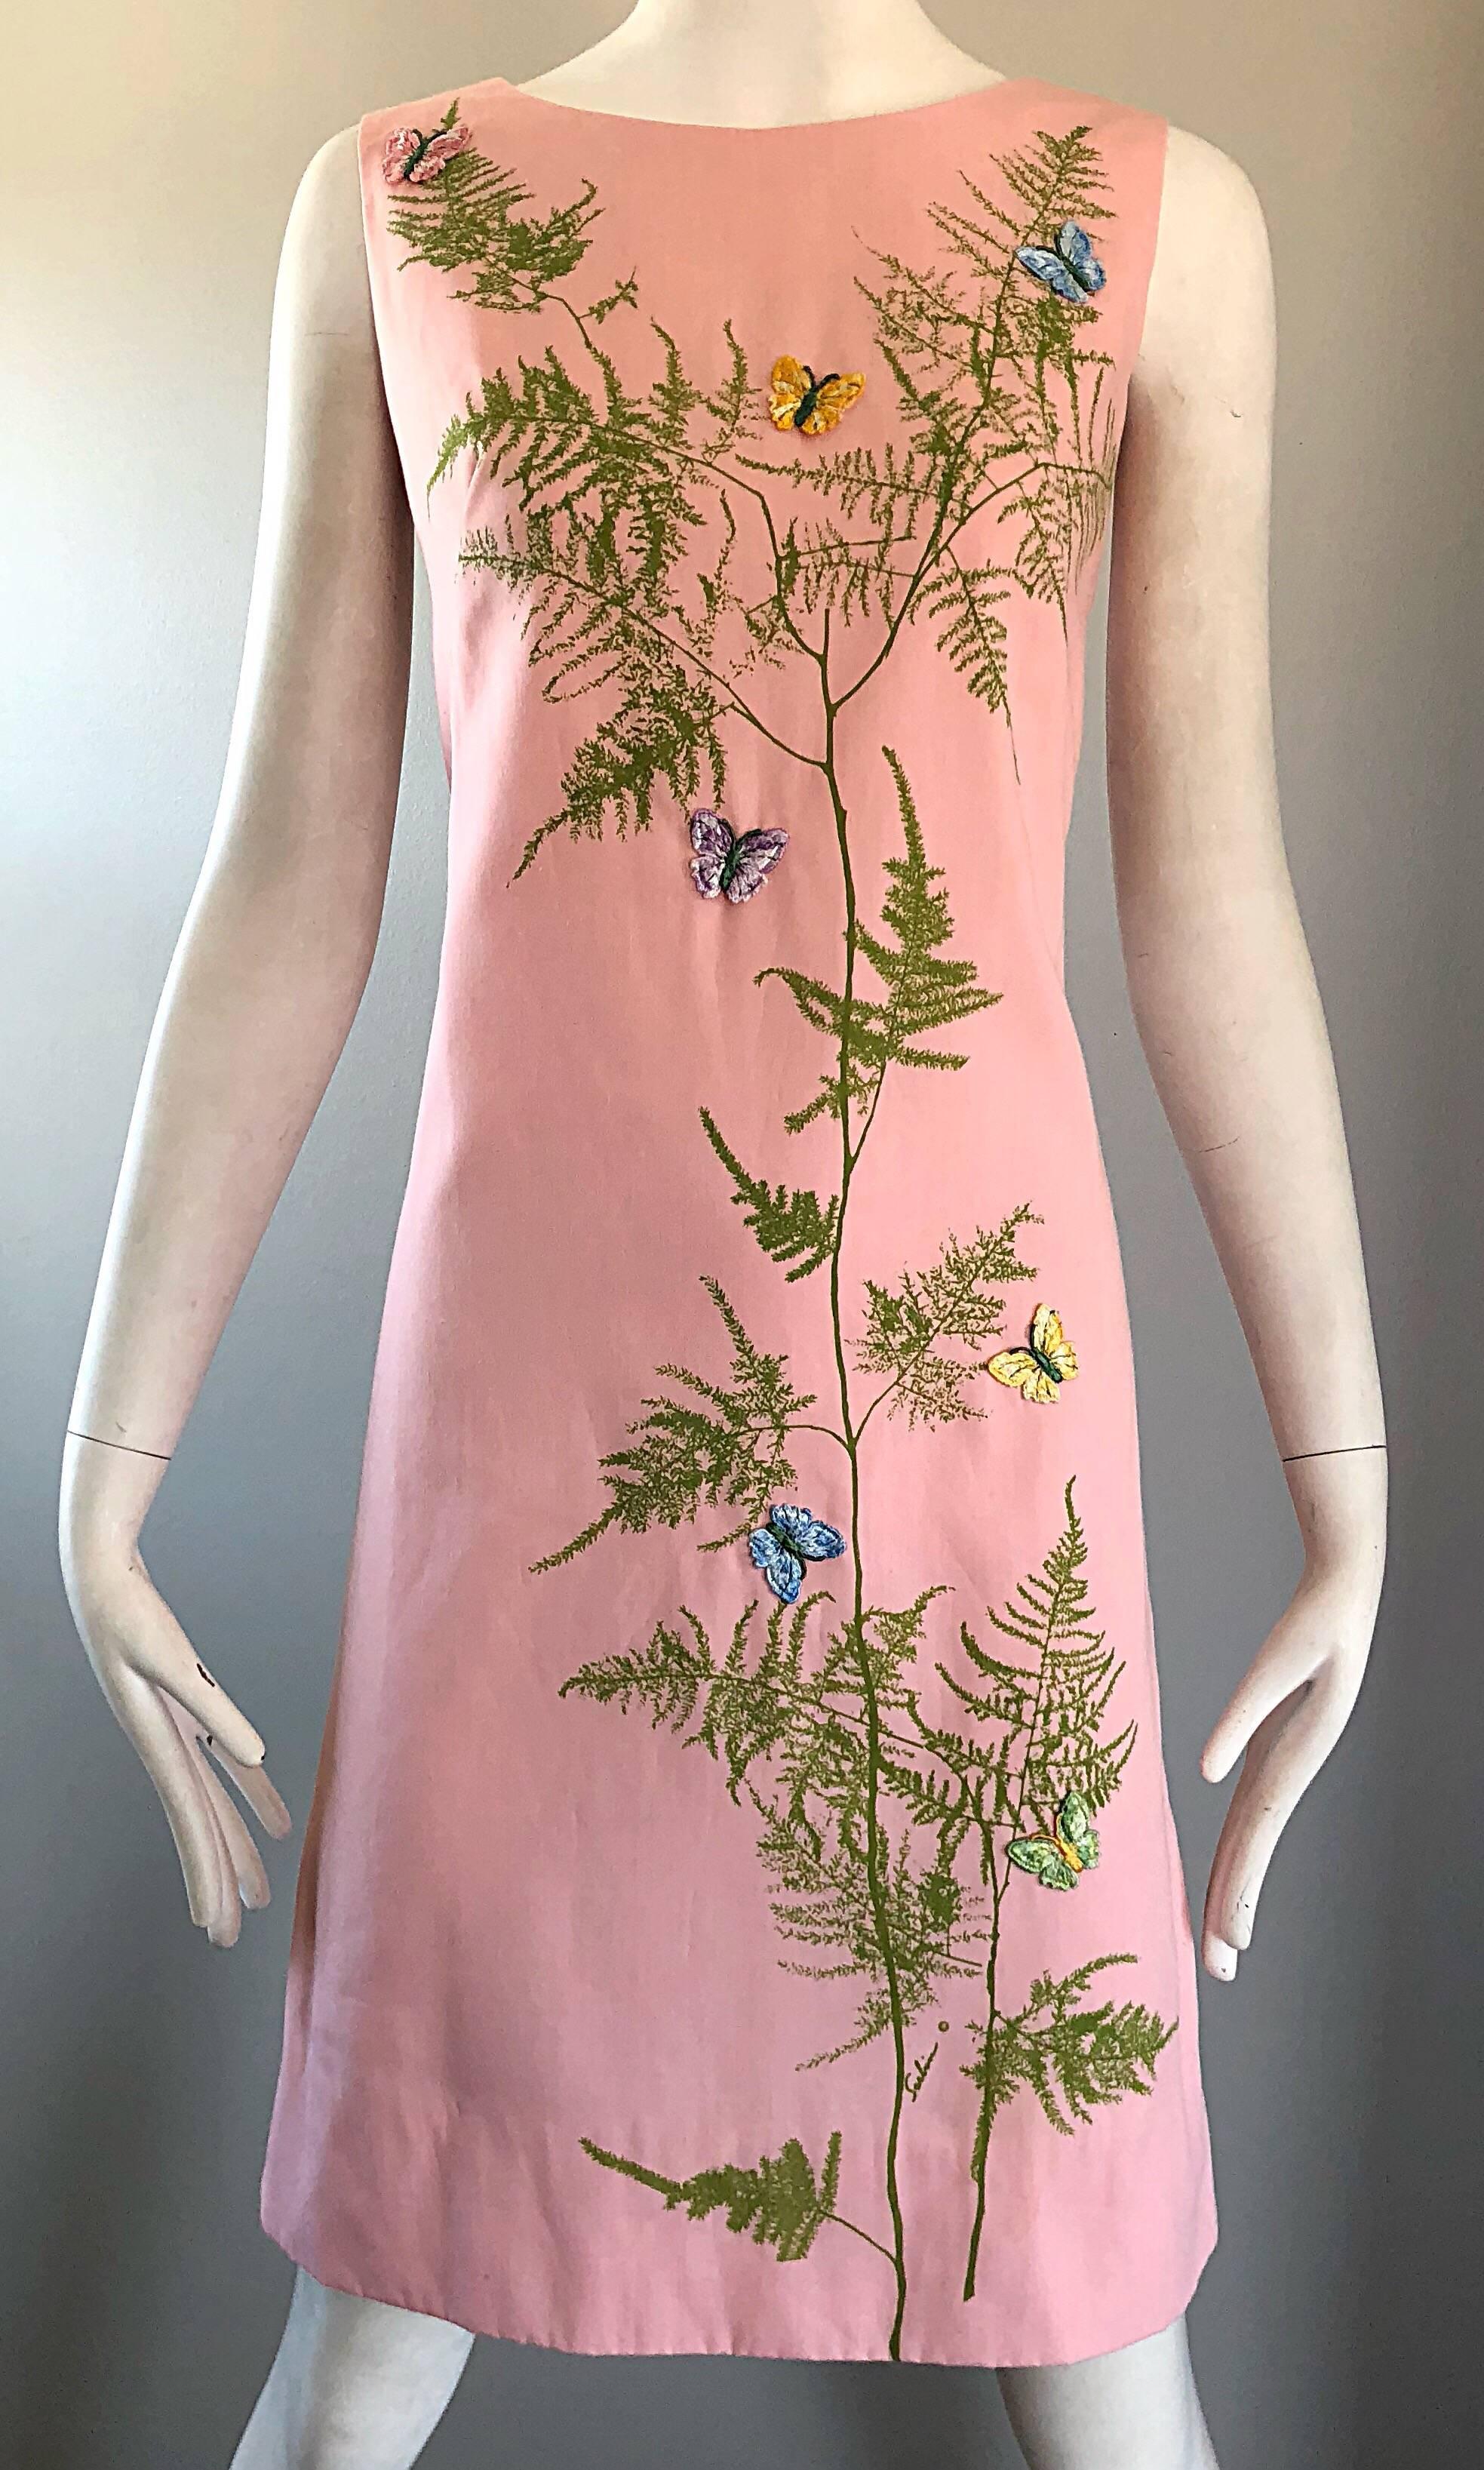 Beige Chic 1960s Pale Pink Trees + Embrodiered Butterflies Novelty Vintage Shift Dress